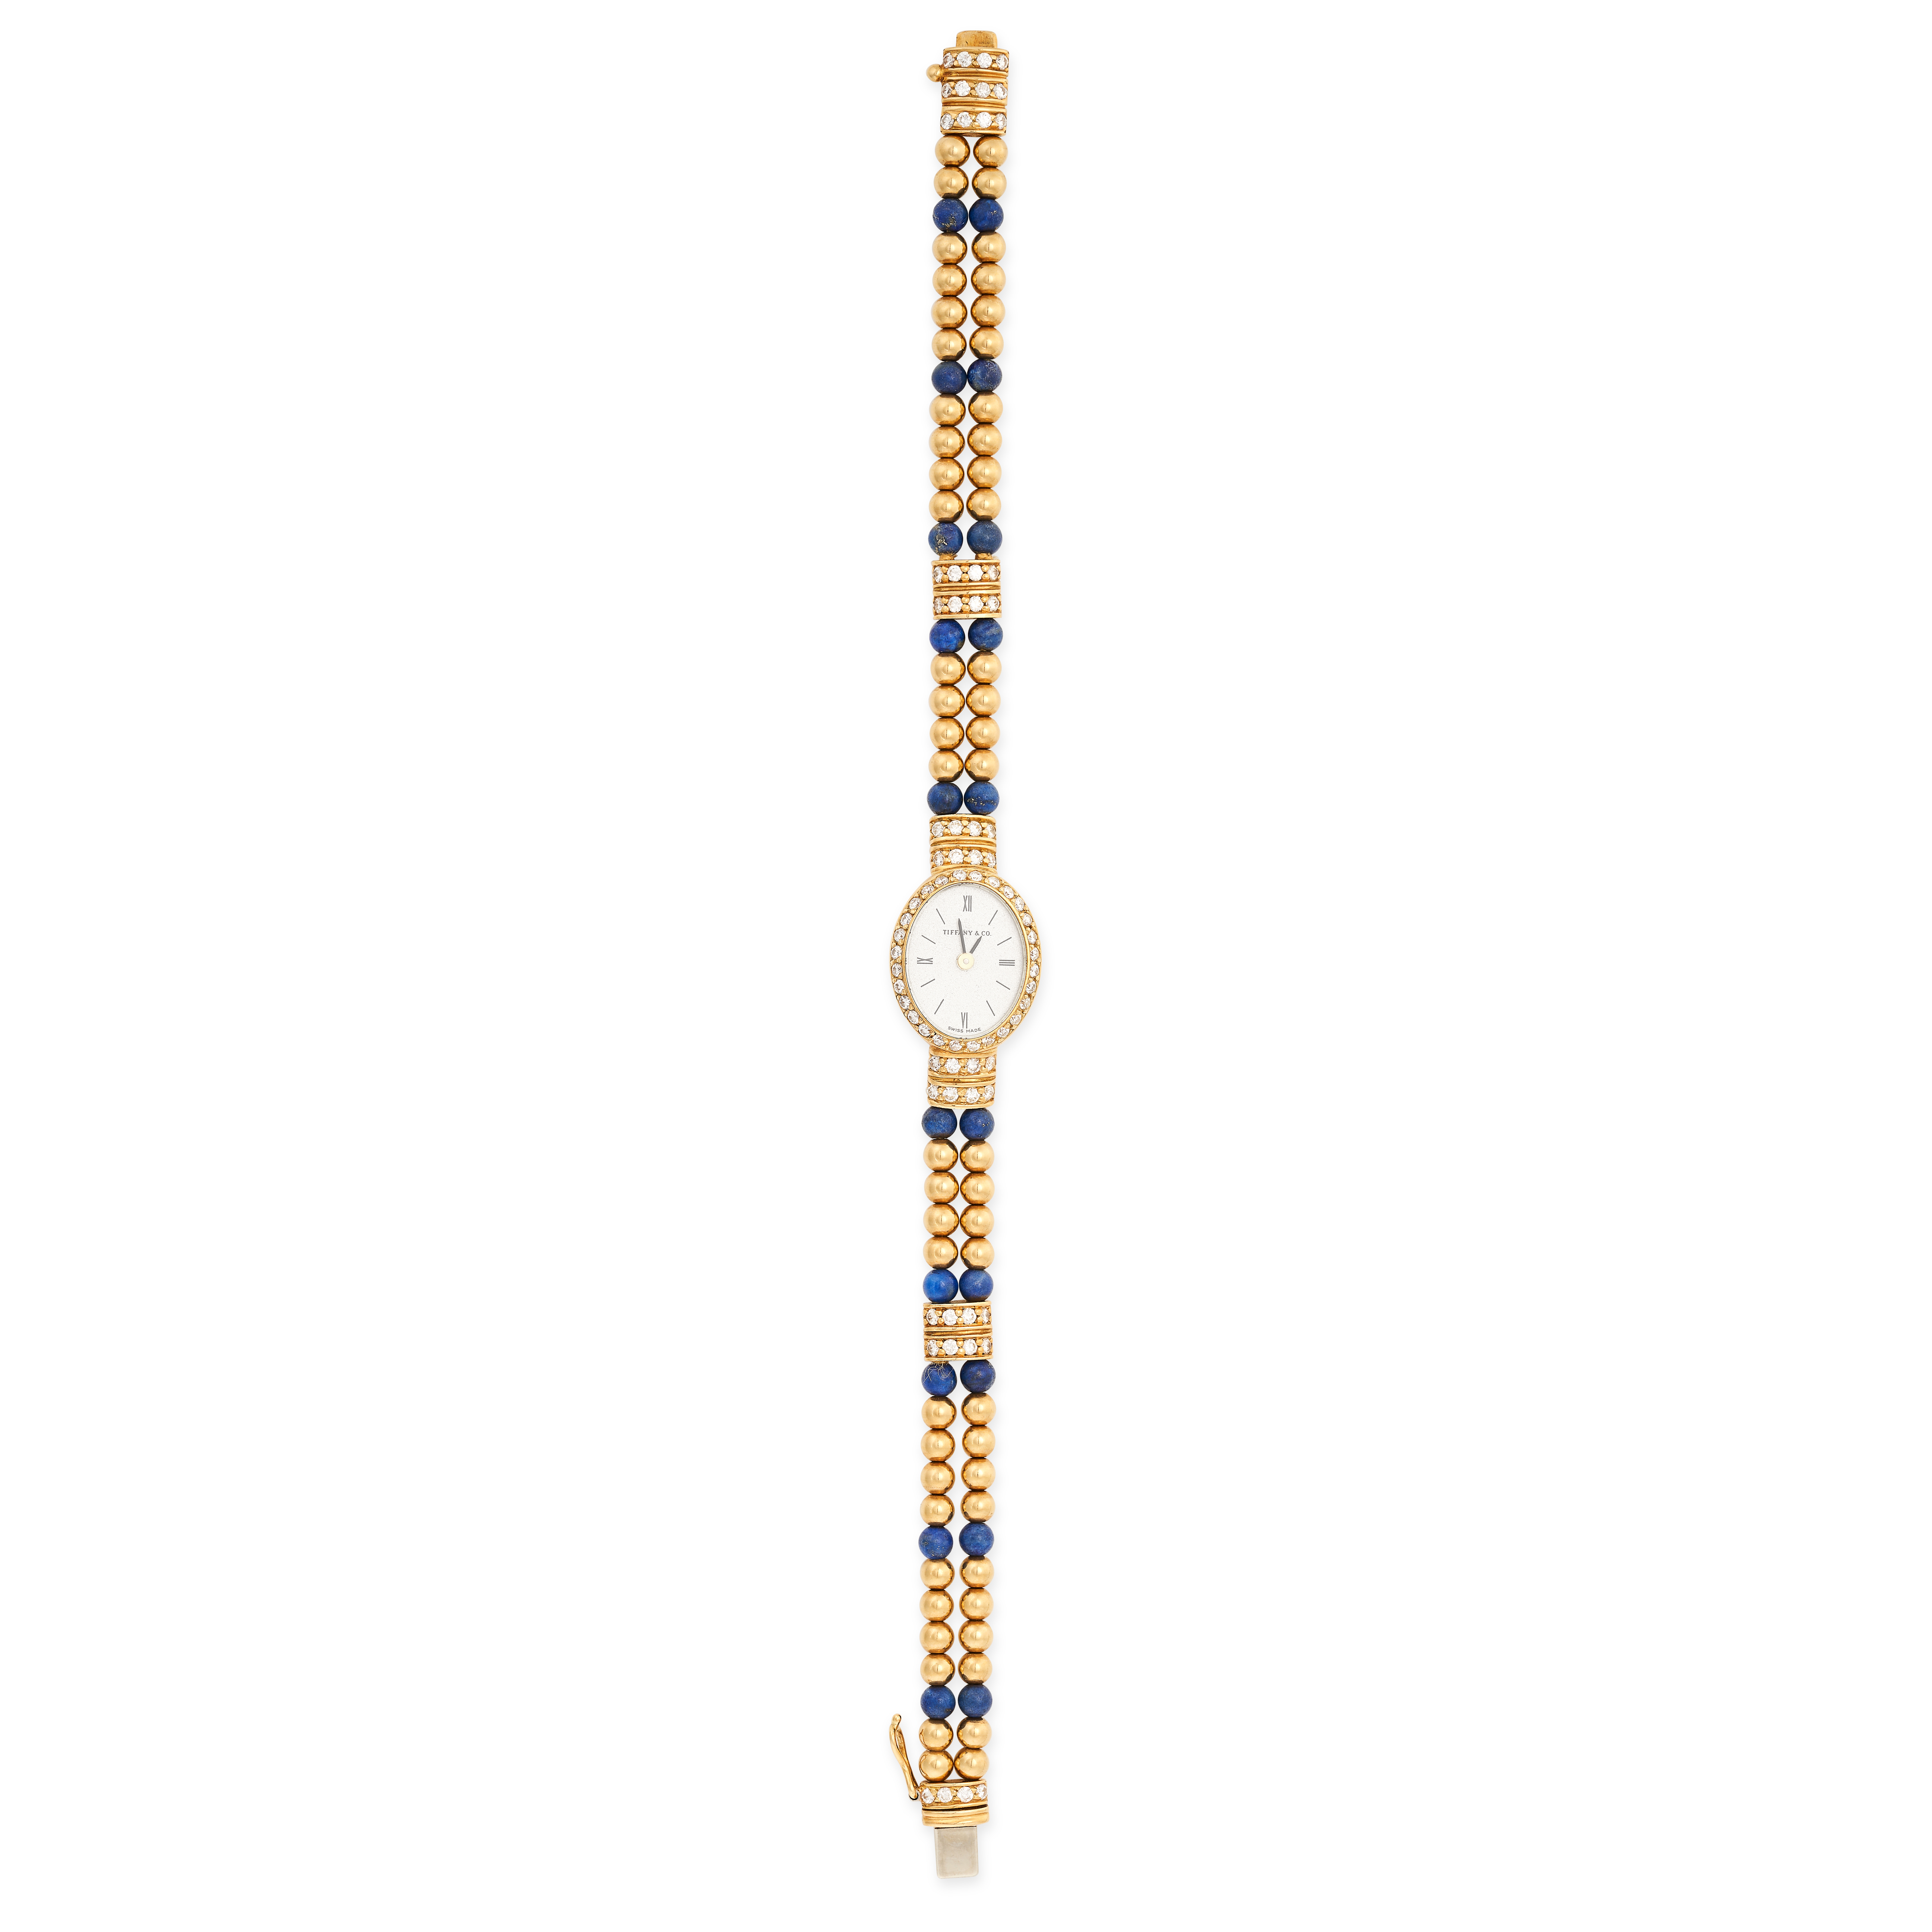 TIFFANY & CO, A VINTAGE LAPIS LAZULI AND DIAMOND WRISTWATCH in 18ct yellow gold, the oval face in - Image 2 of 2